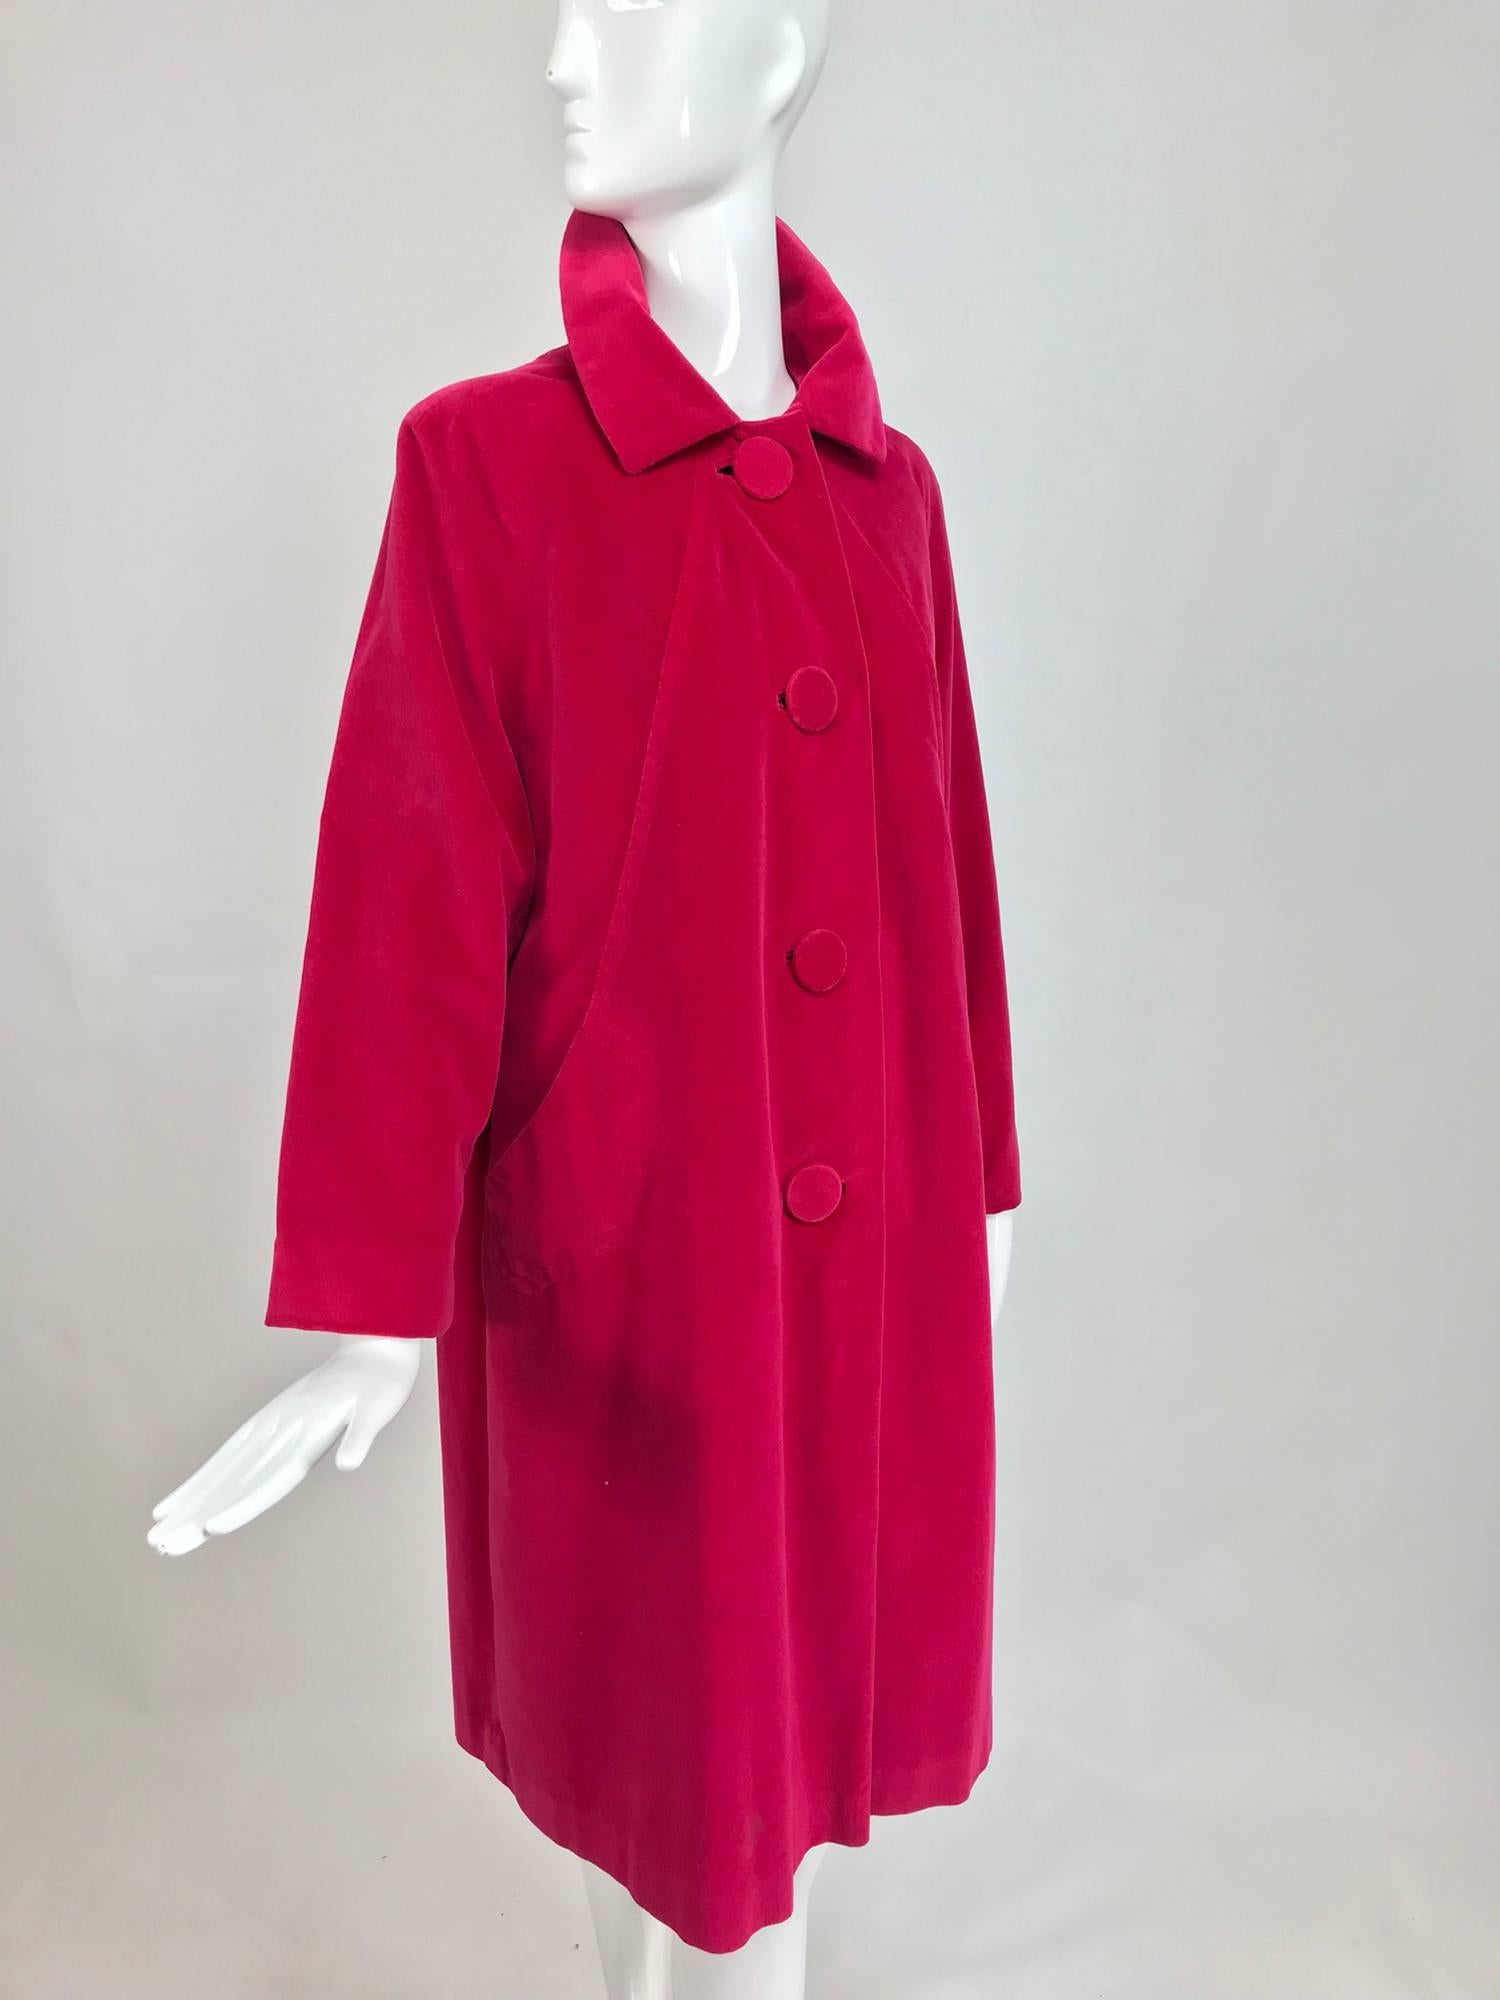 Marguerite Rubel San Francisco bright pink velvet coat from the 1960s...Marguerite Rubel founded her namesake Manufacturing company in San Francisco in the late 1940s, the company specialized in coats & jackets. Her outerwear was carried at